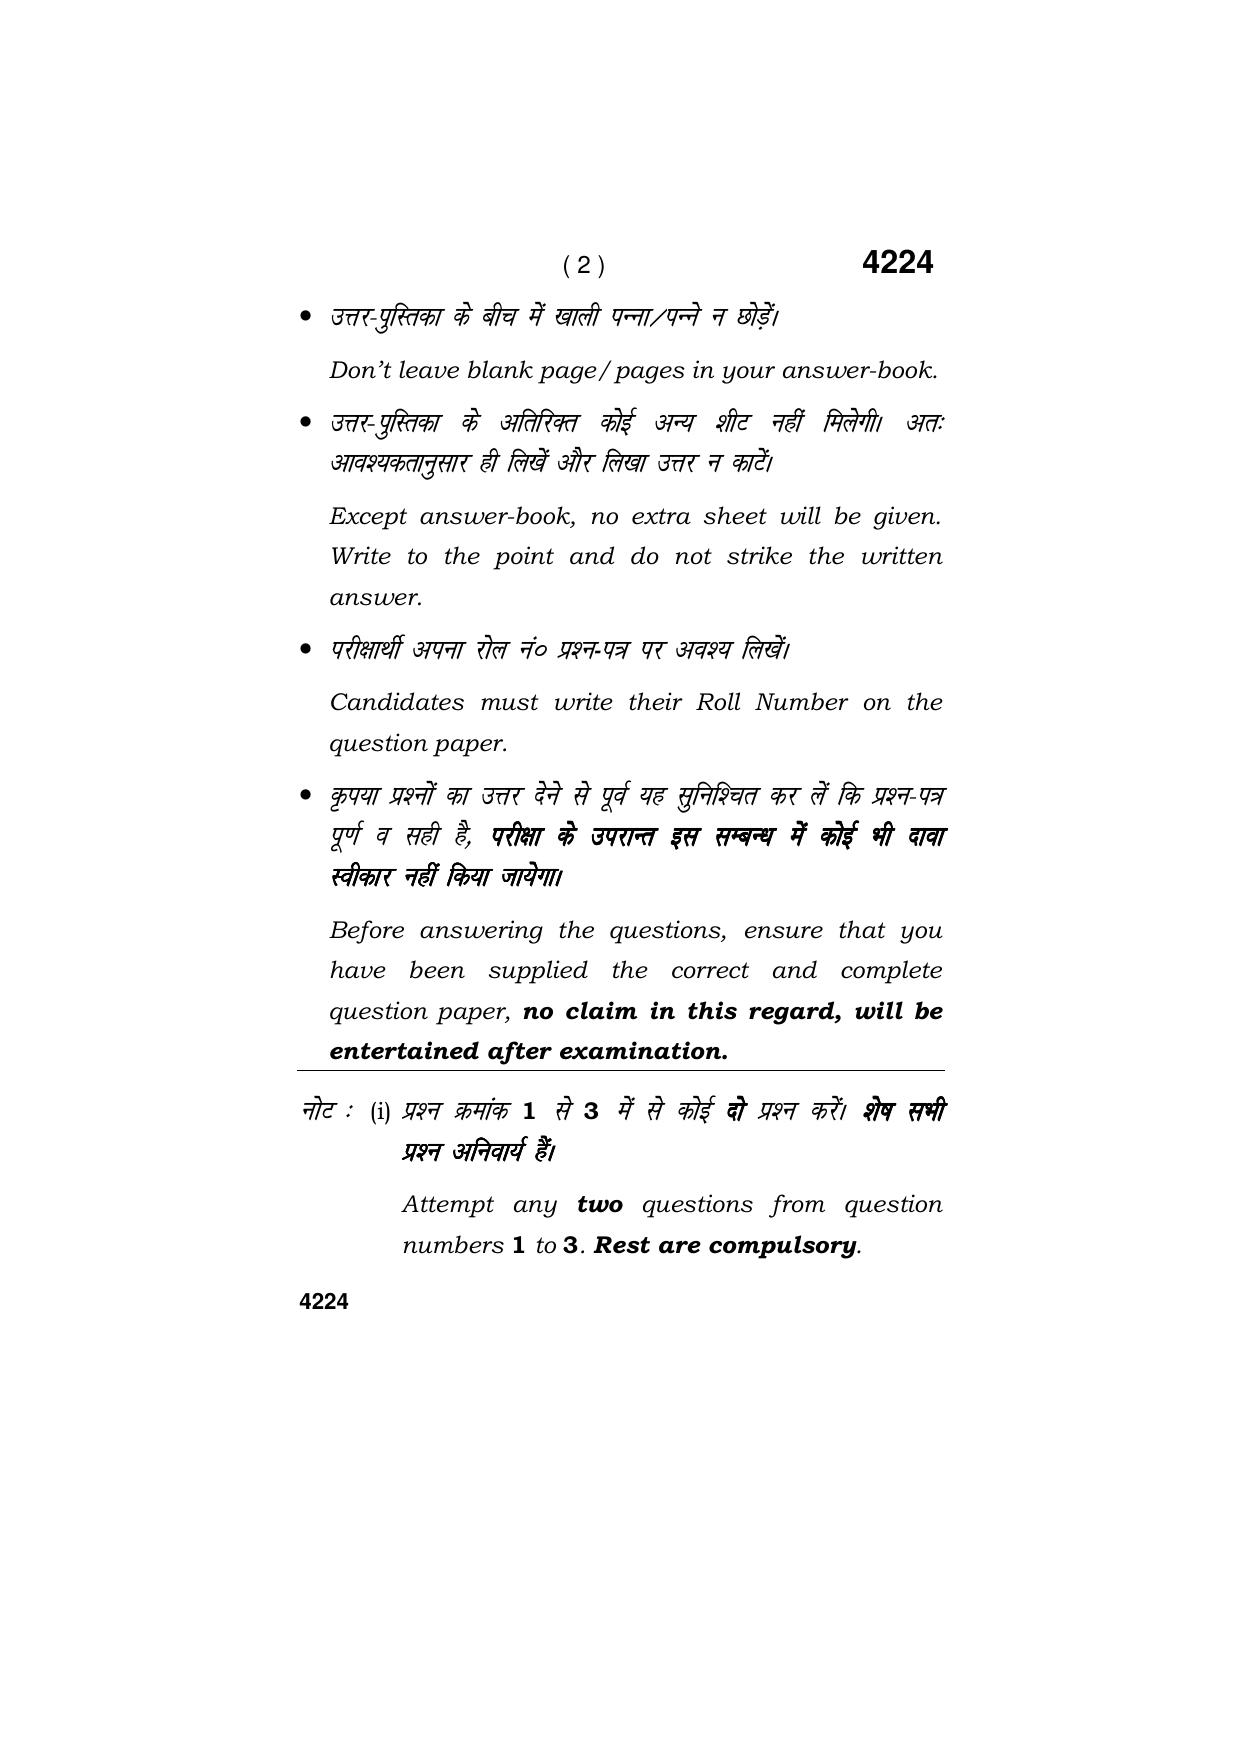 Haryana Board HBSE Class 10 IT & ITES 2019 Question Paper - Page 2